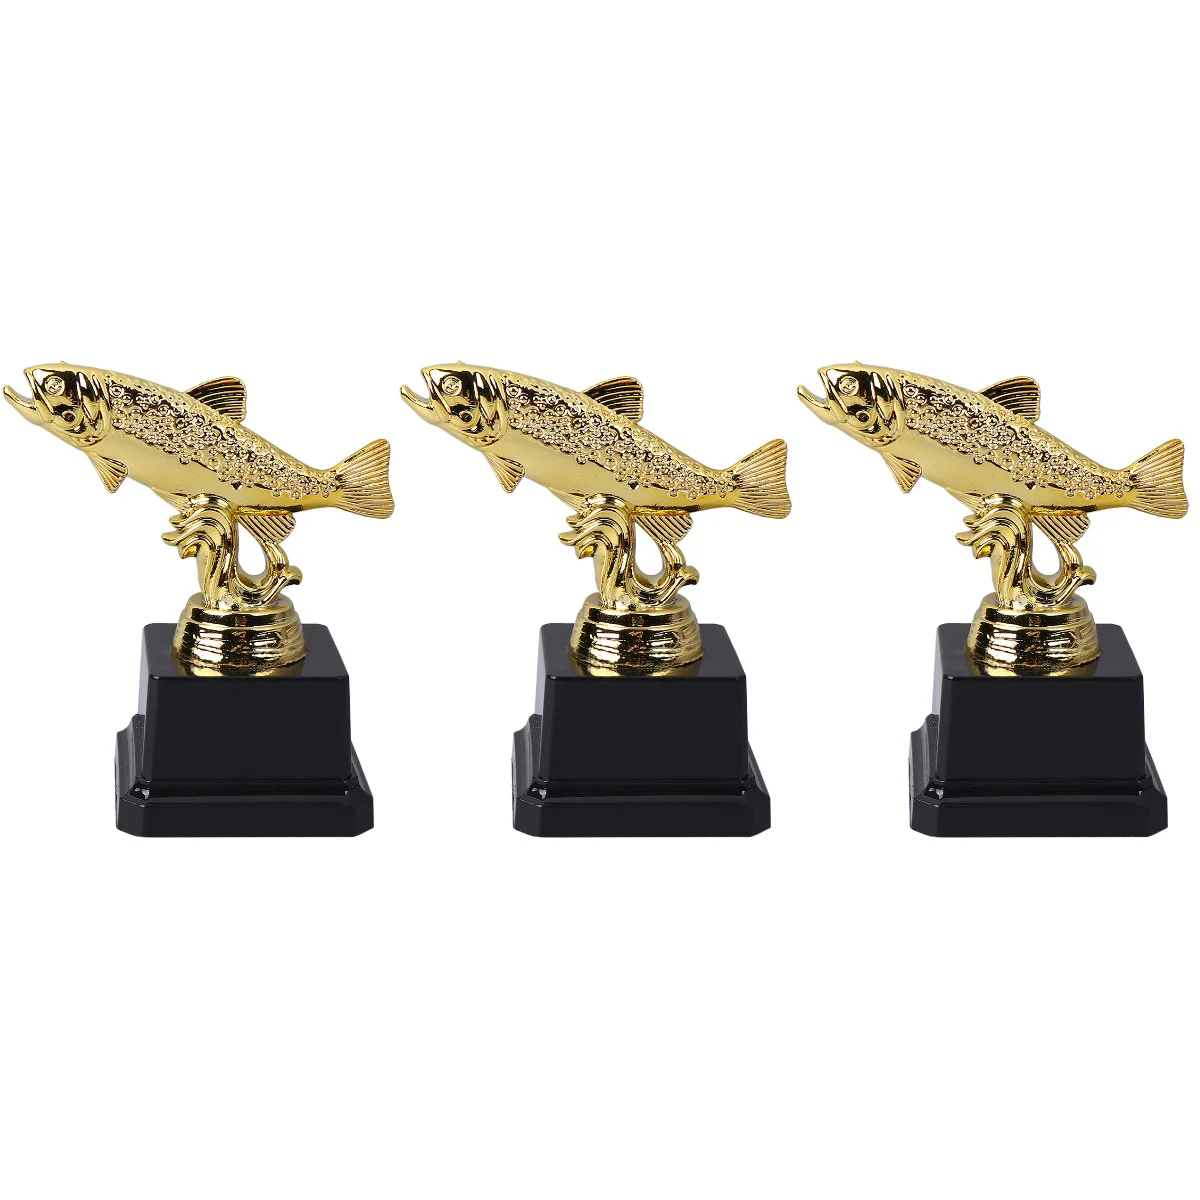 

Trophy Fish Kids Award Fishing Trophies Gold Statue Cupfor Figurines Collection Medals Decoration Favors Party Ornament Desktop